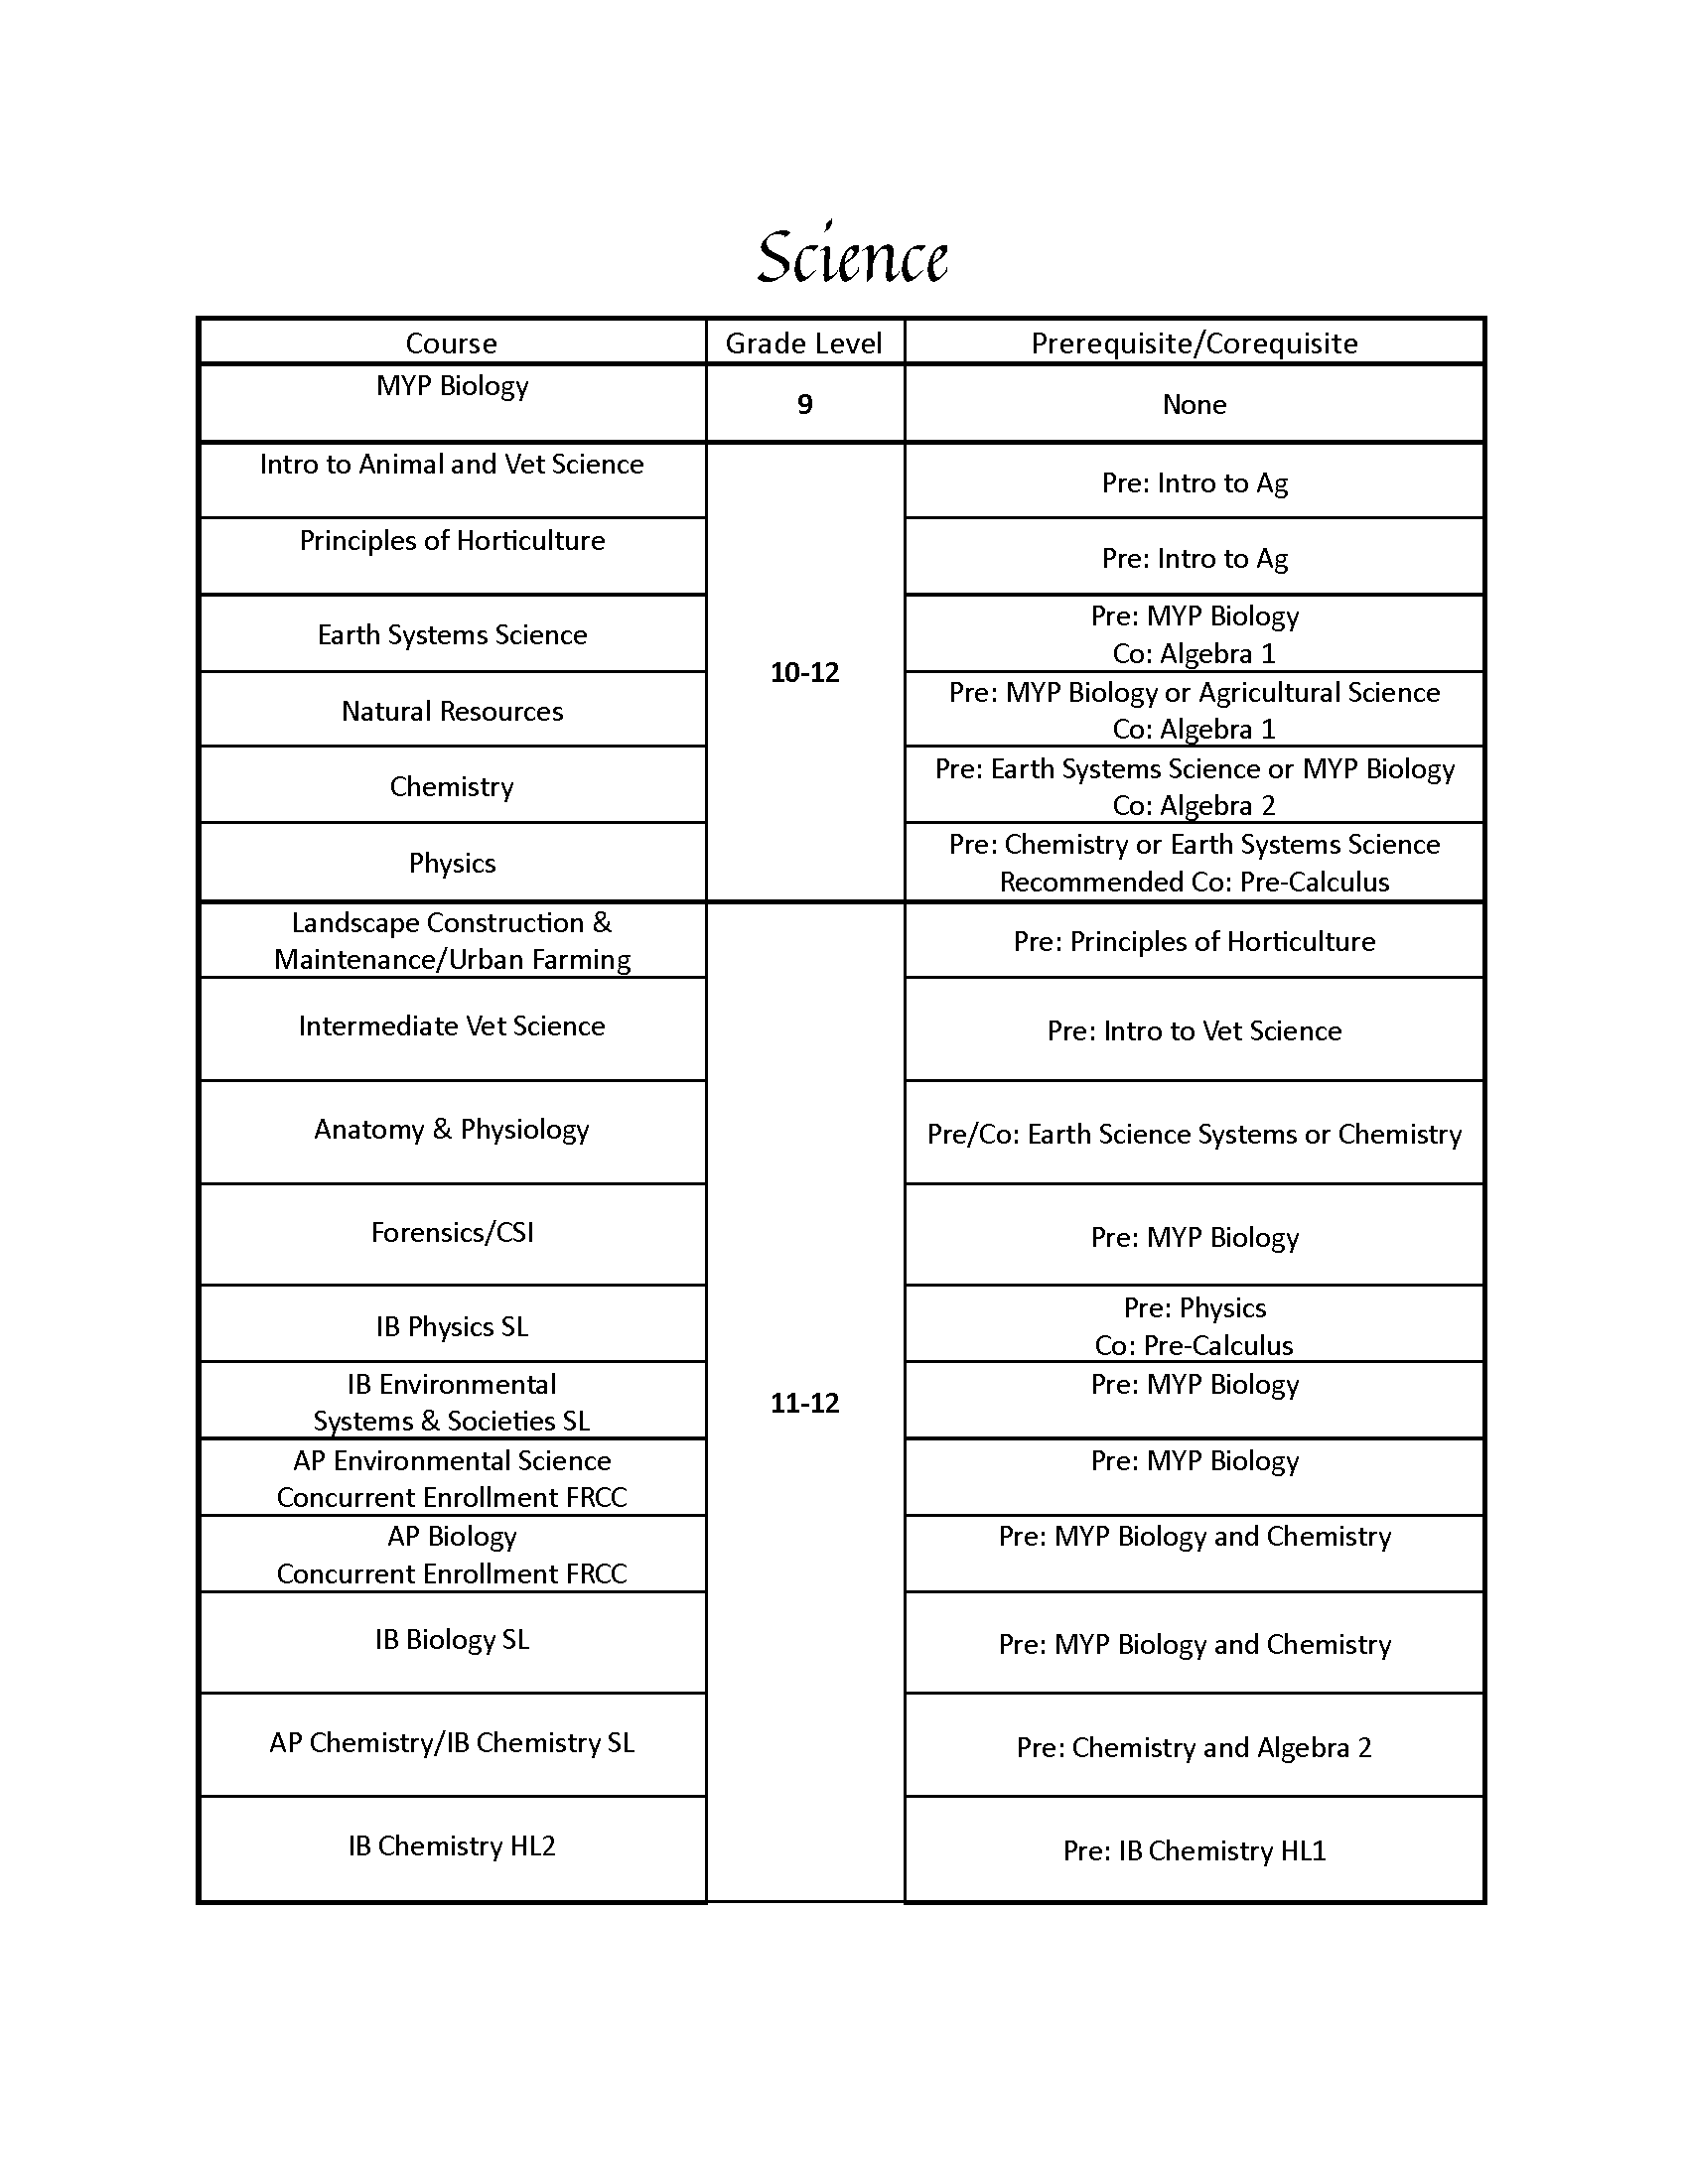 Science Course Offerings